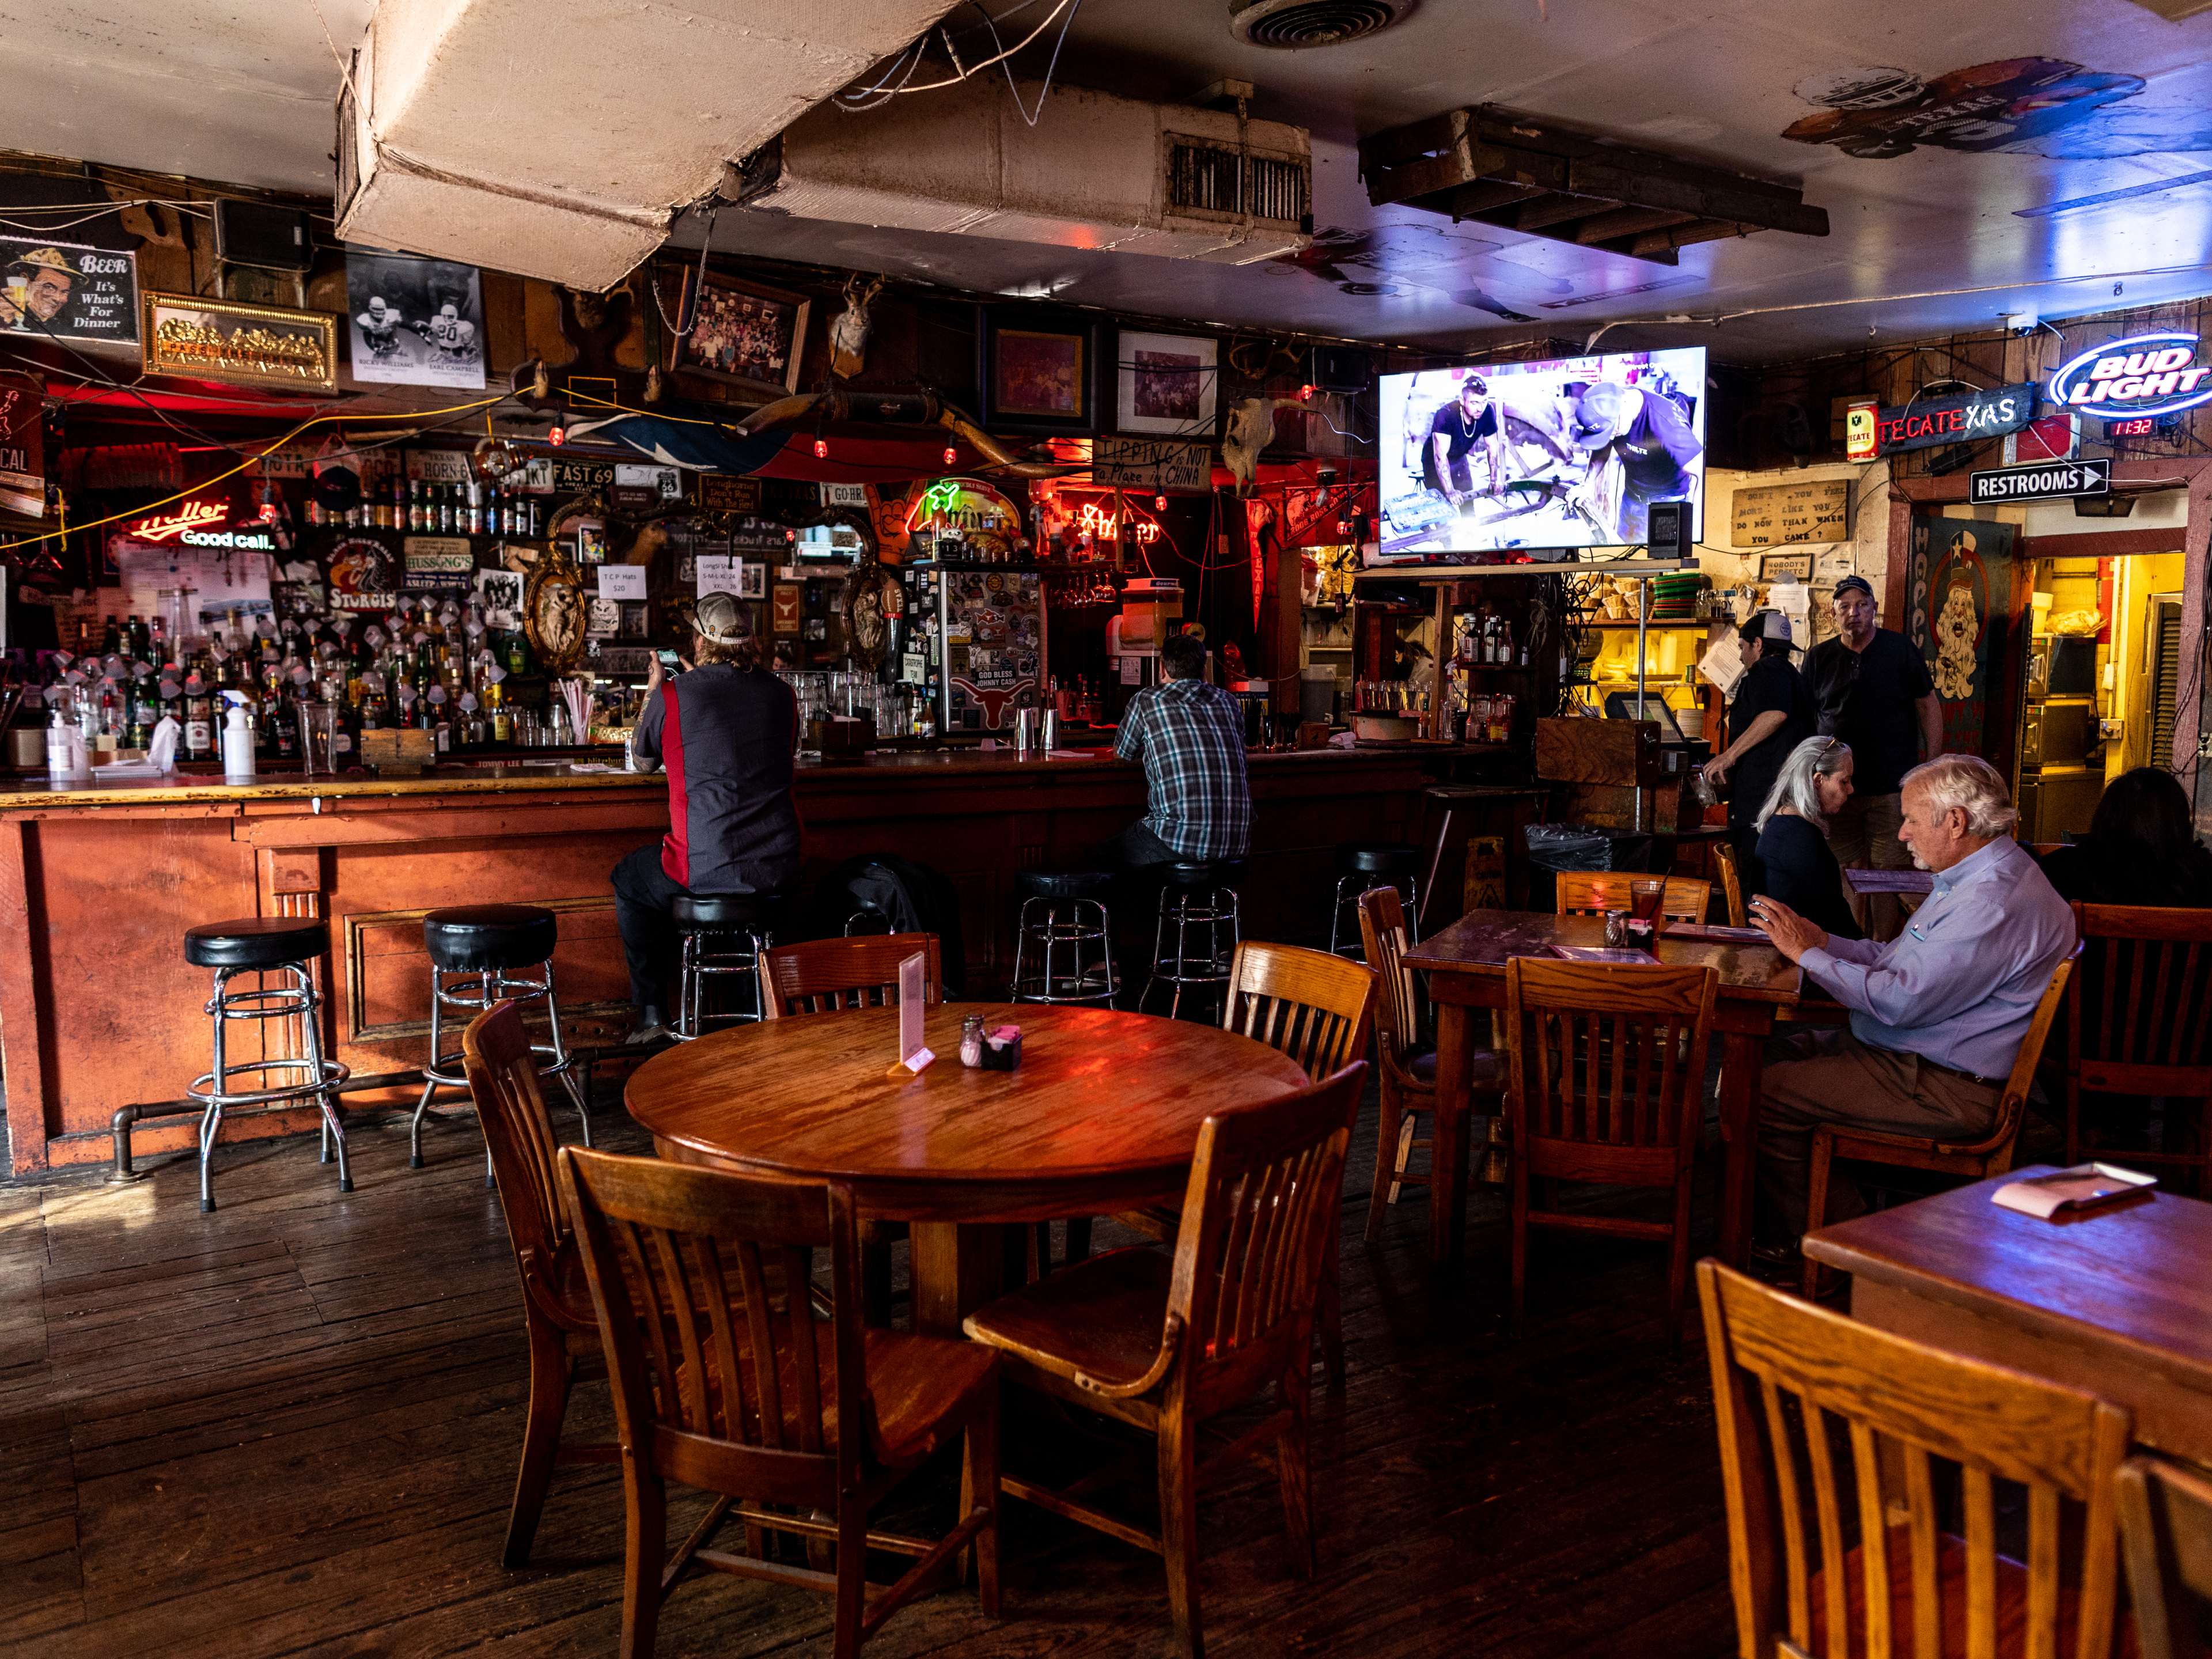 The interior of Texas Chili Parlor. There are people sitting at a wooden bar, and wooden tables and chairs.  A TV hung above the bar is playing sports.